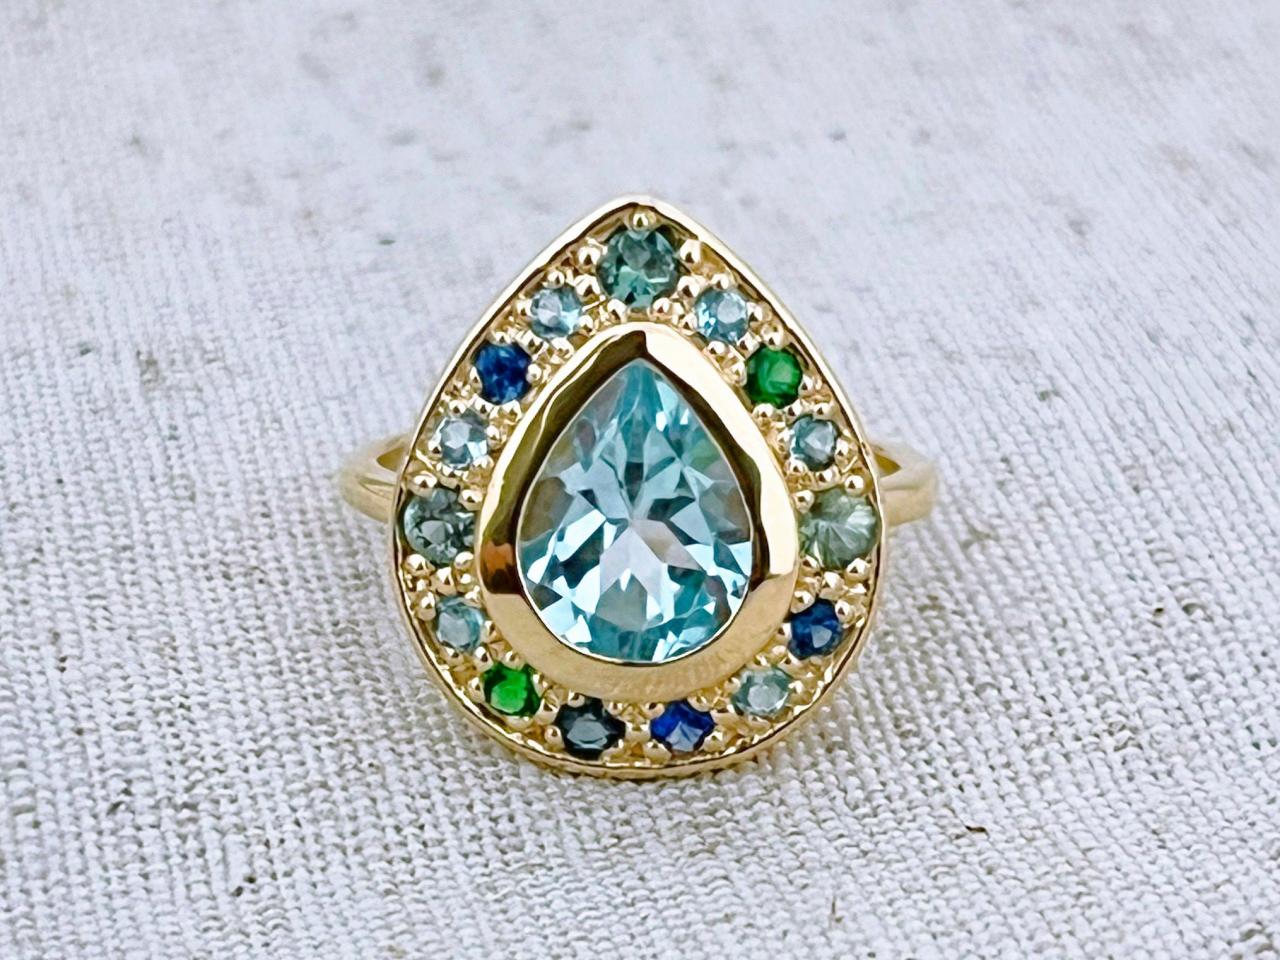 Engagement Solid Gold Ring And Pear Shape Blue Topaz, Halo Gemstones Dainty Promise Ring, 18k Gold Victorian Natural Sapphire Large Ring